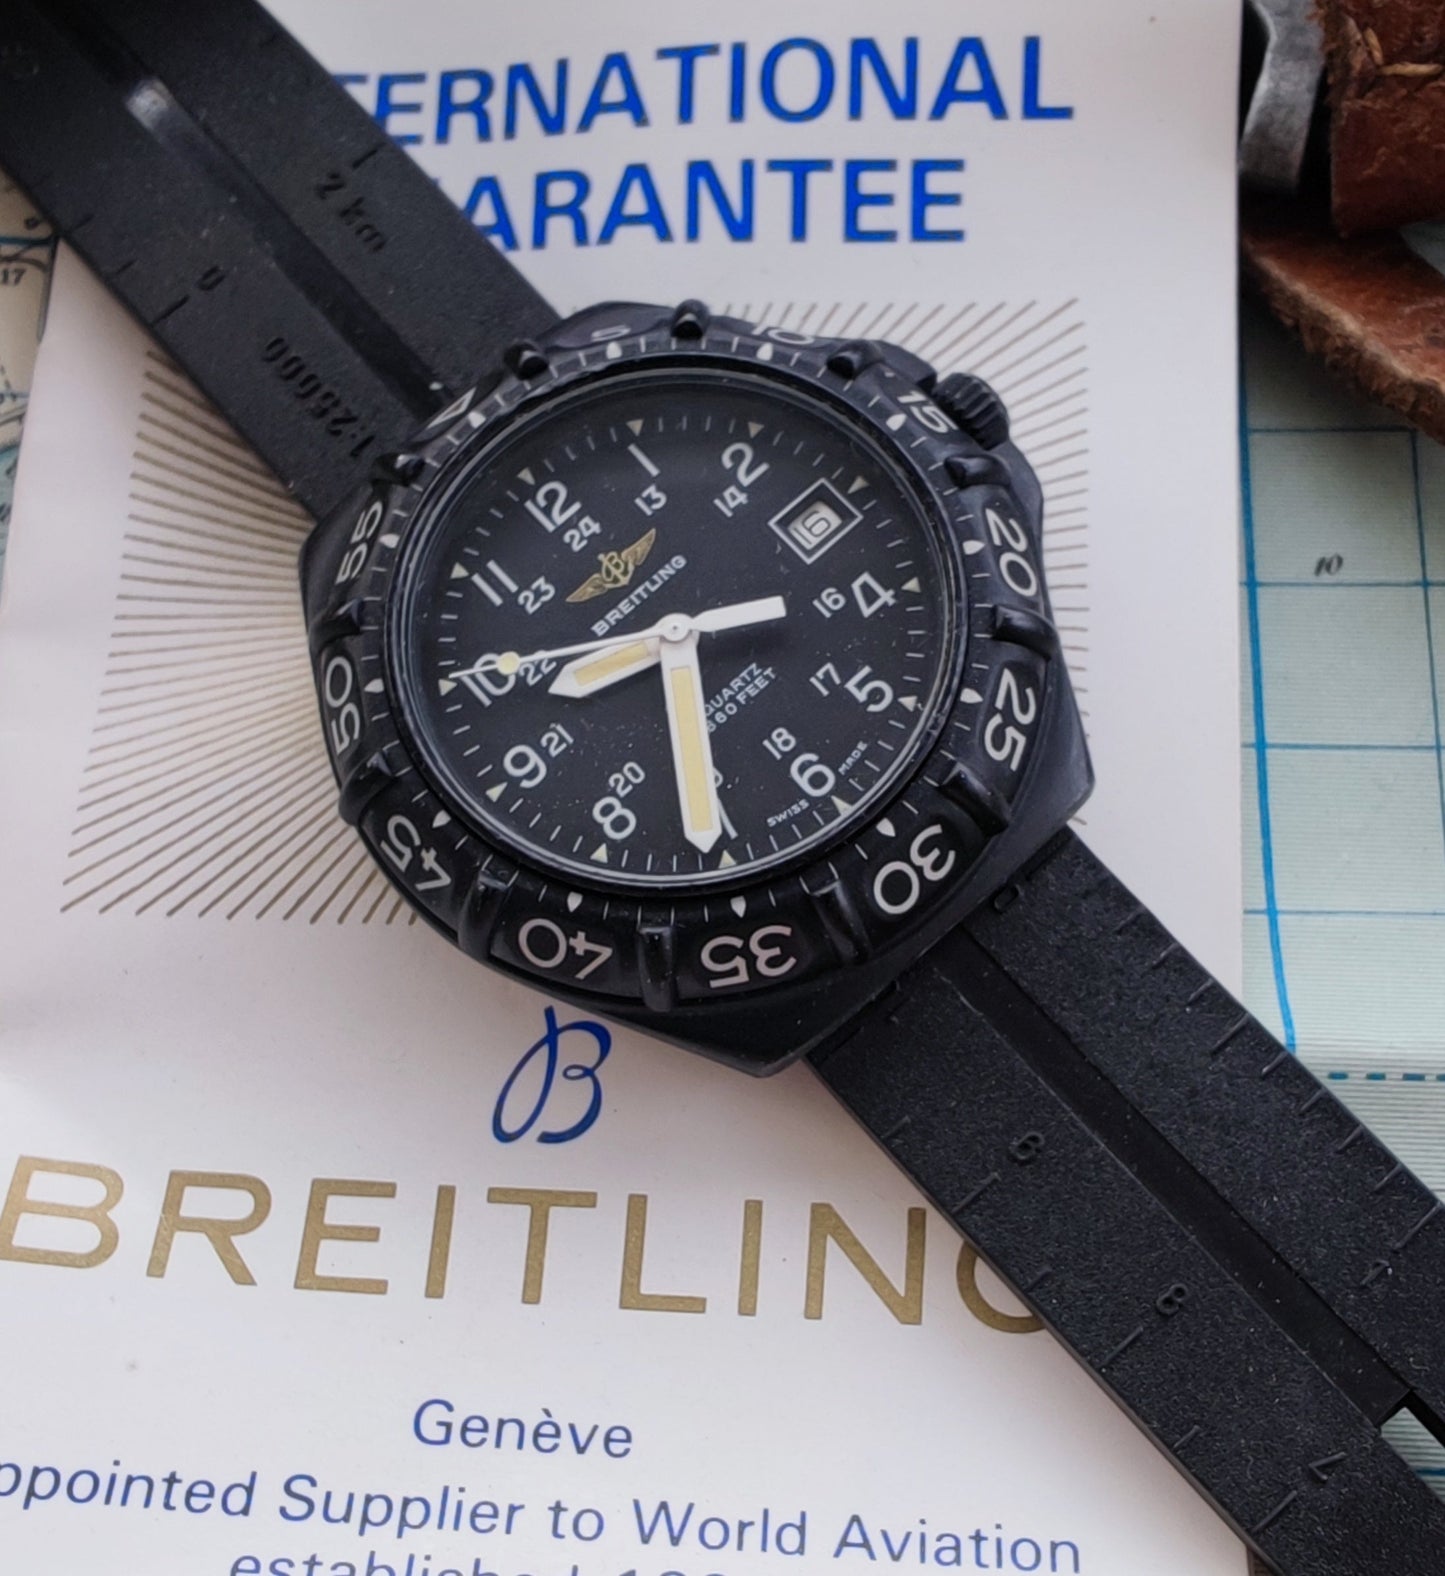 MINT+++ Breitling Colt Military PVD 80310 - strap & 1986 warranty